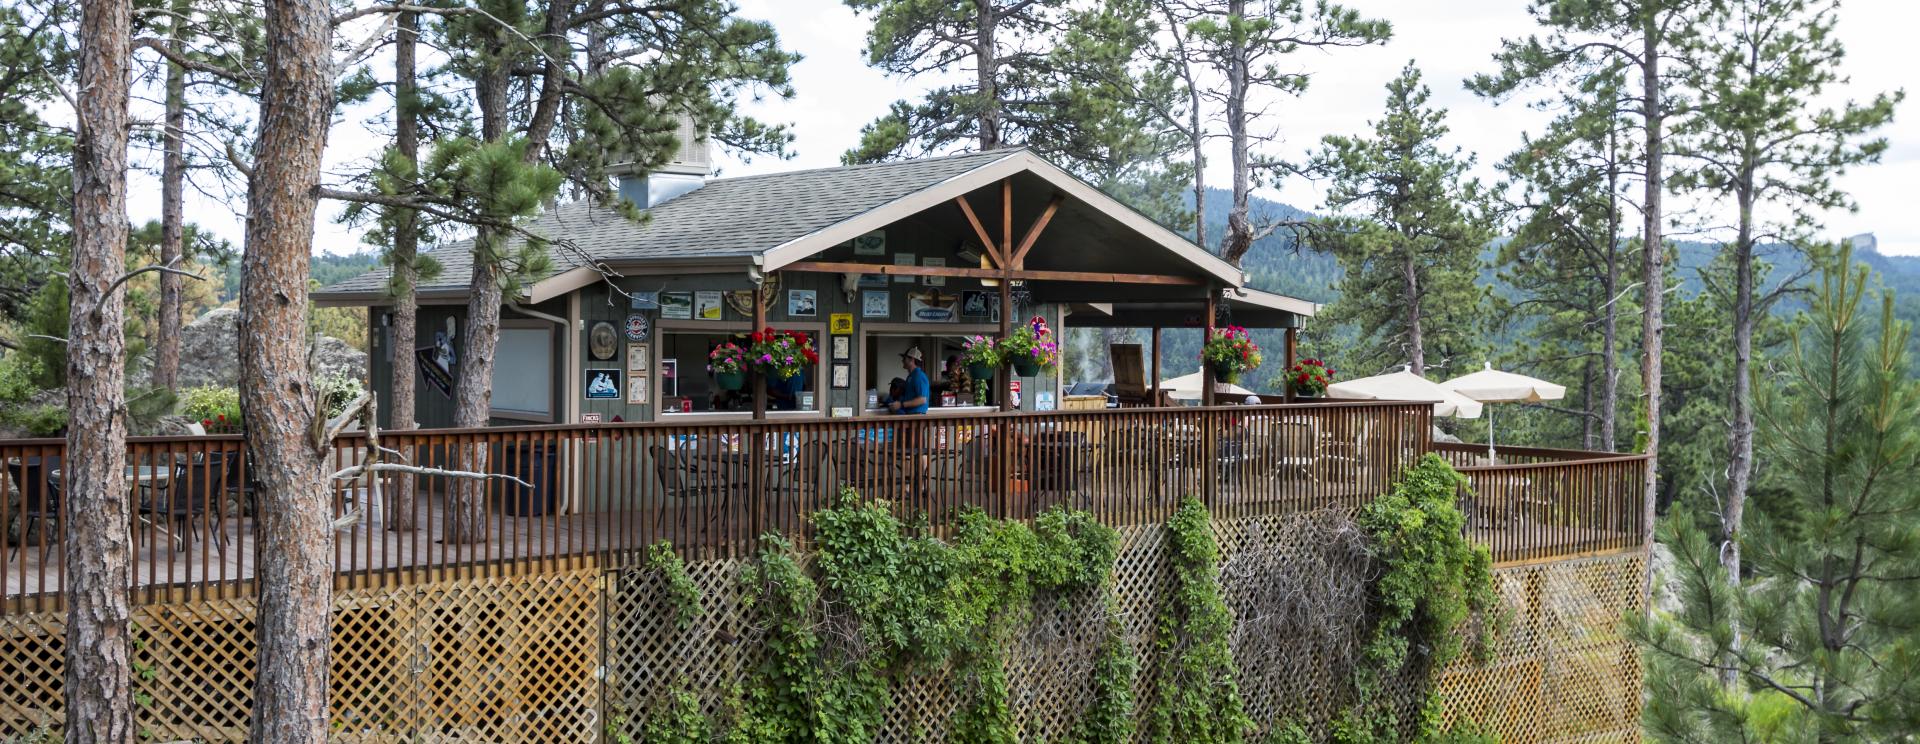 George's Grill at Rushmore Tramway Adventures